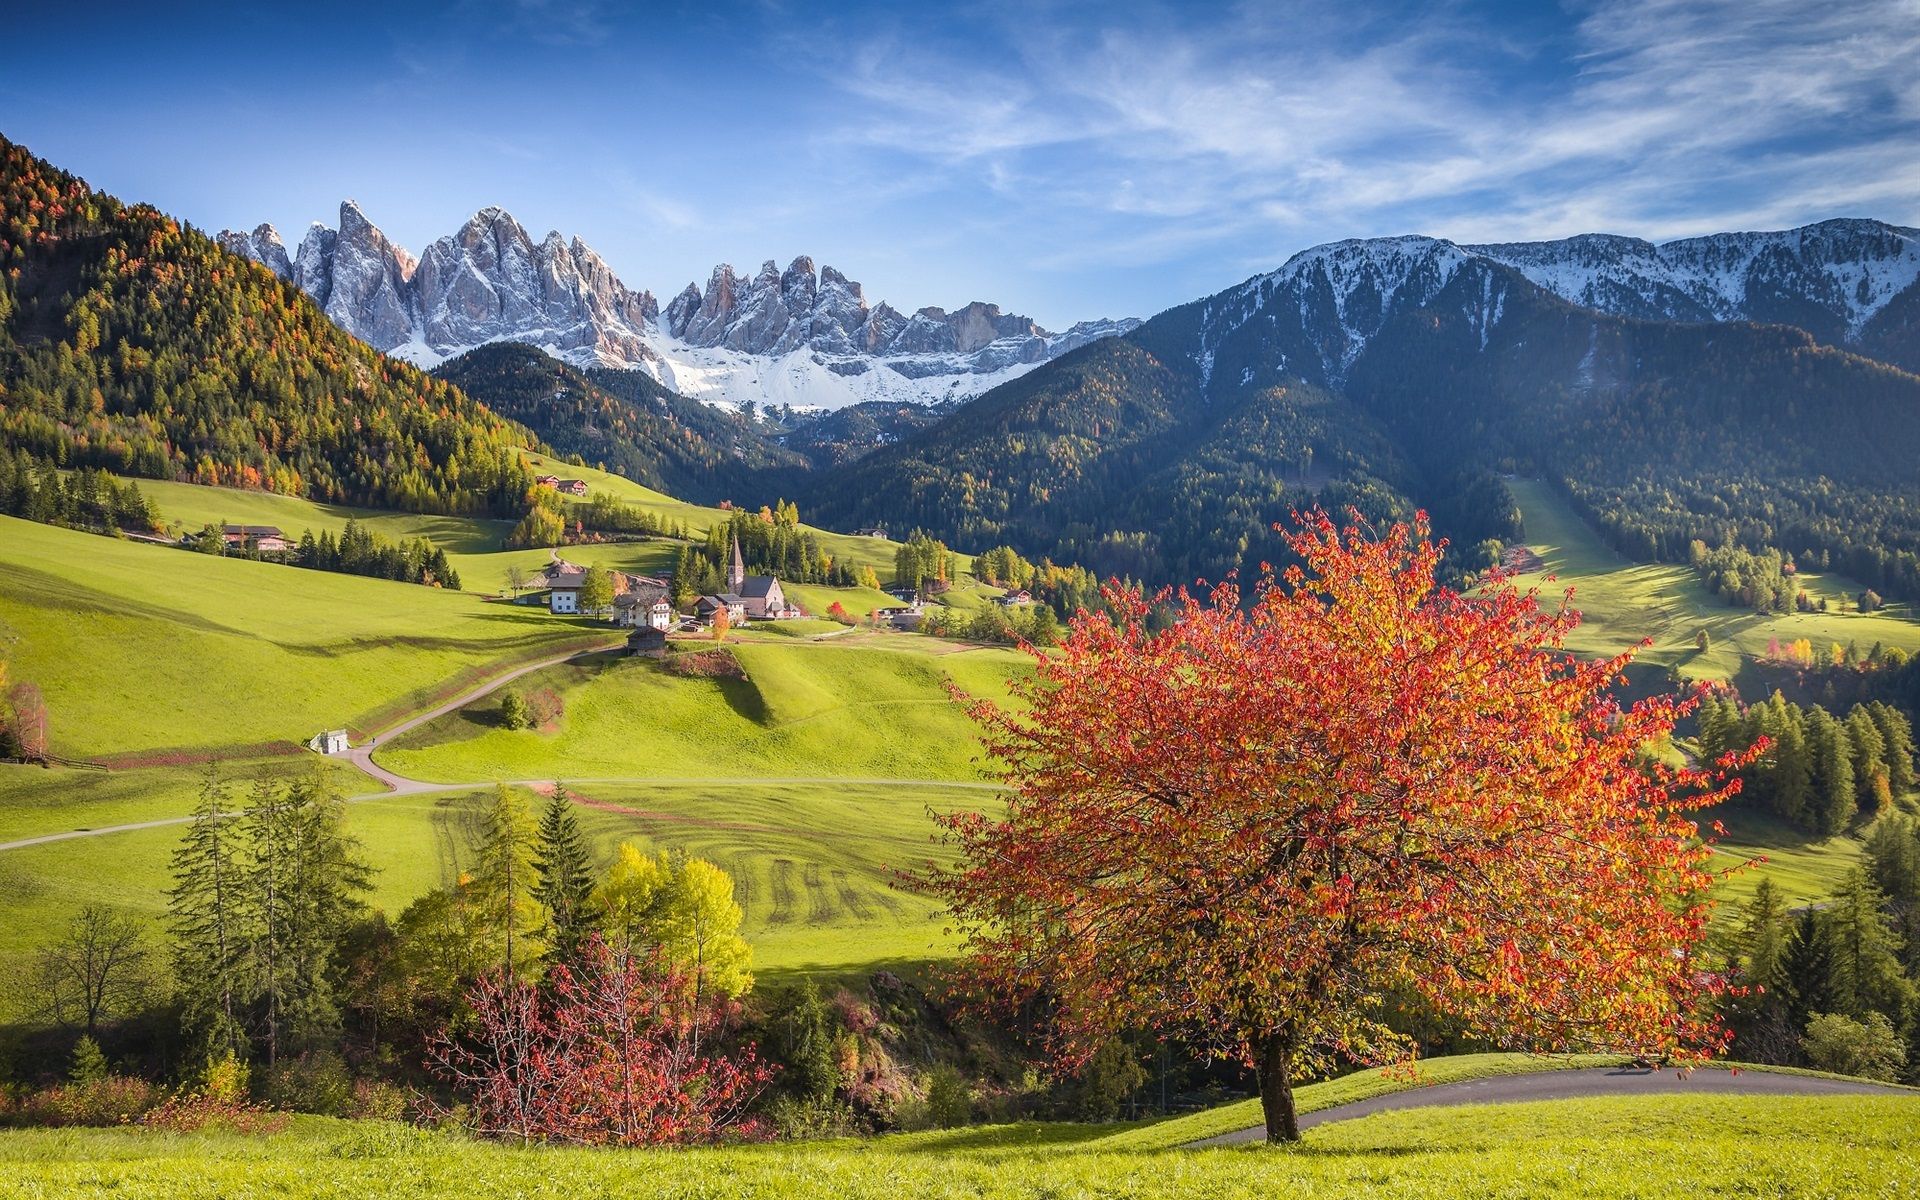 Wallpaper Italy, Alps, beautiful scenery, forest, trees, mountains, village, autumn 1920x1200 HD Picture, Image